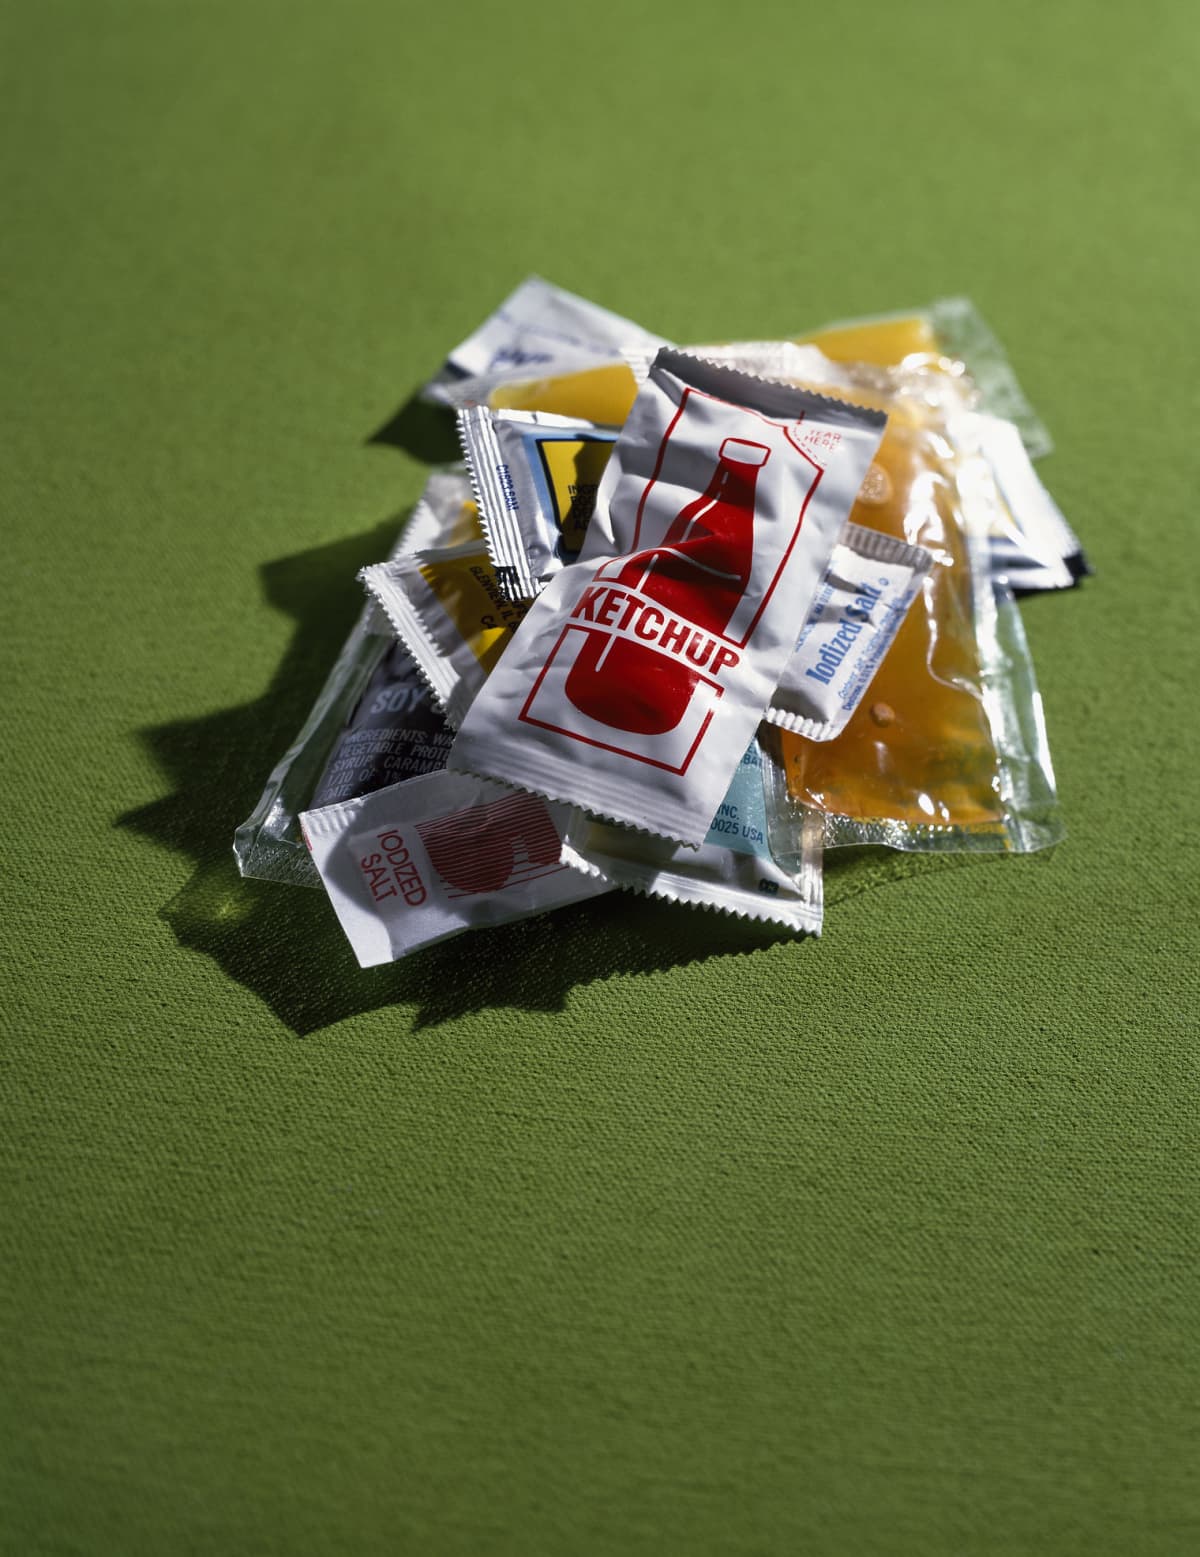 Several plastic packets of condiments